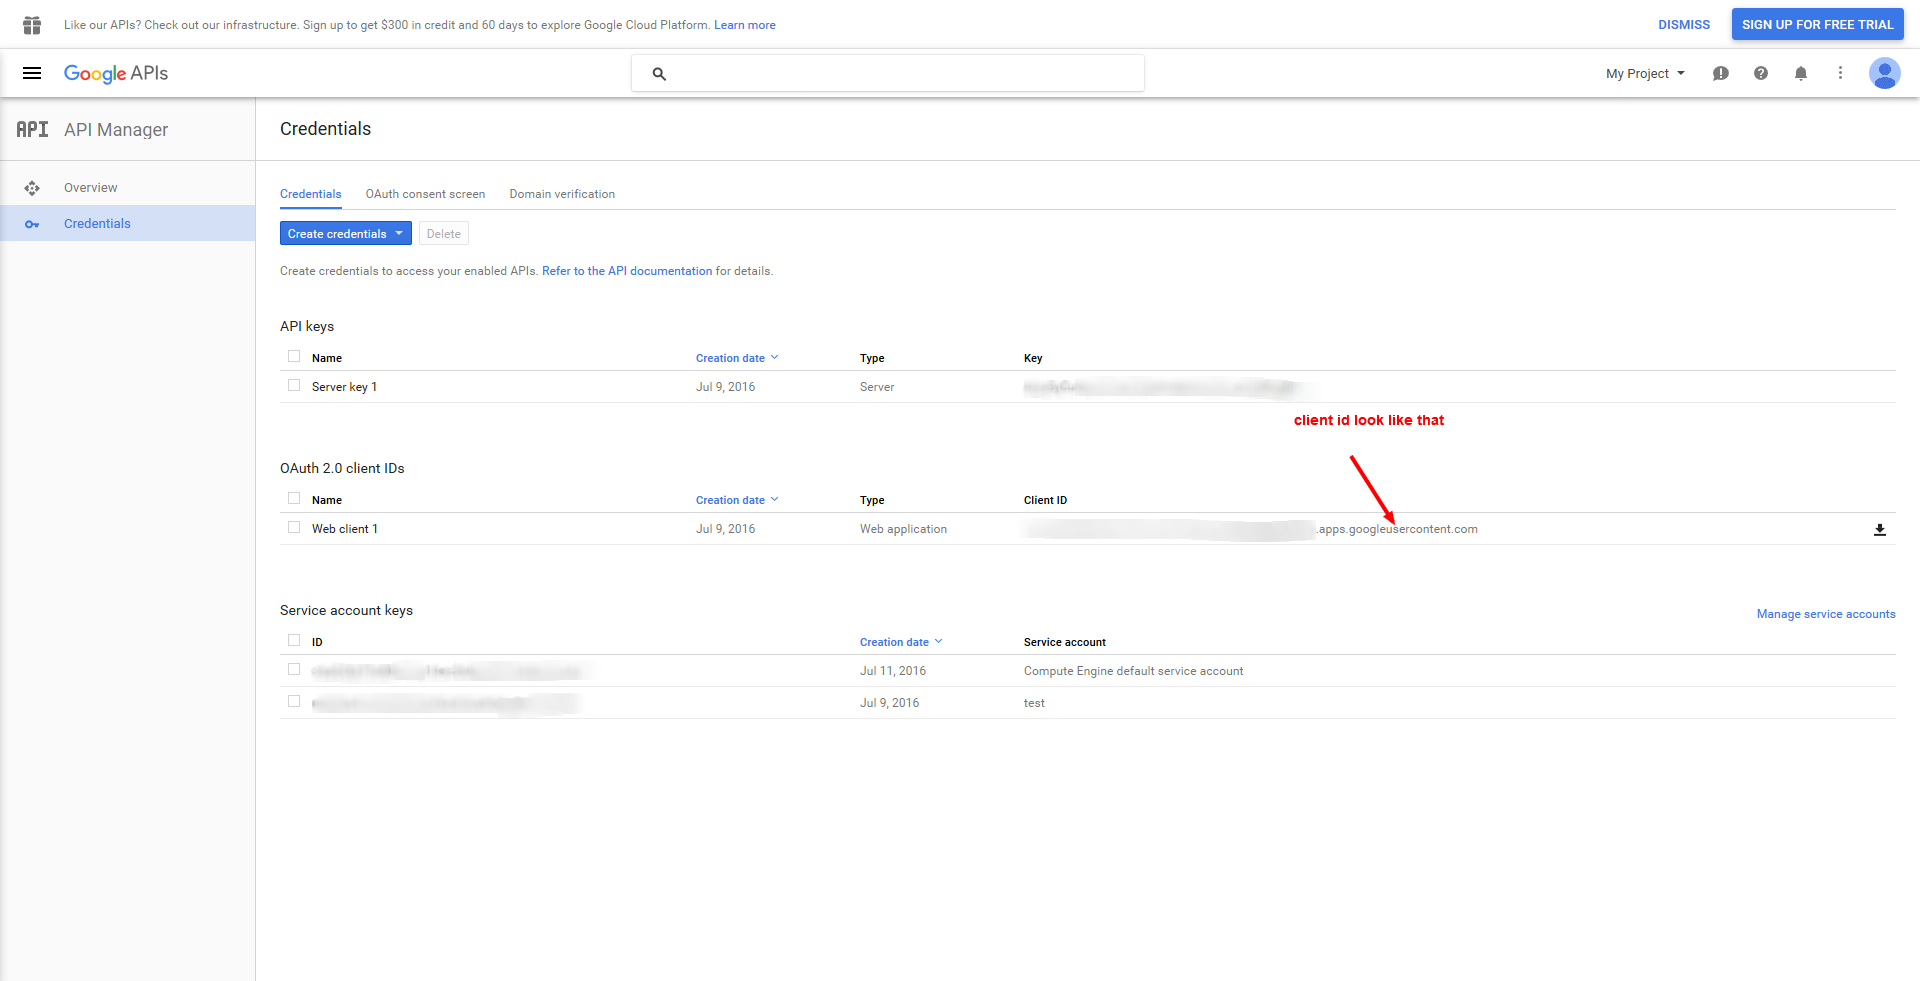 In the credential link you will see your google client id end with "apps.googleusercontent.com".